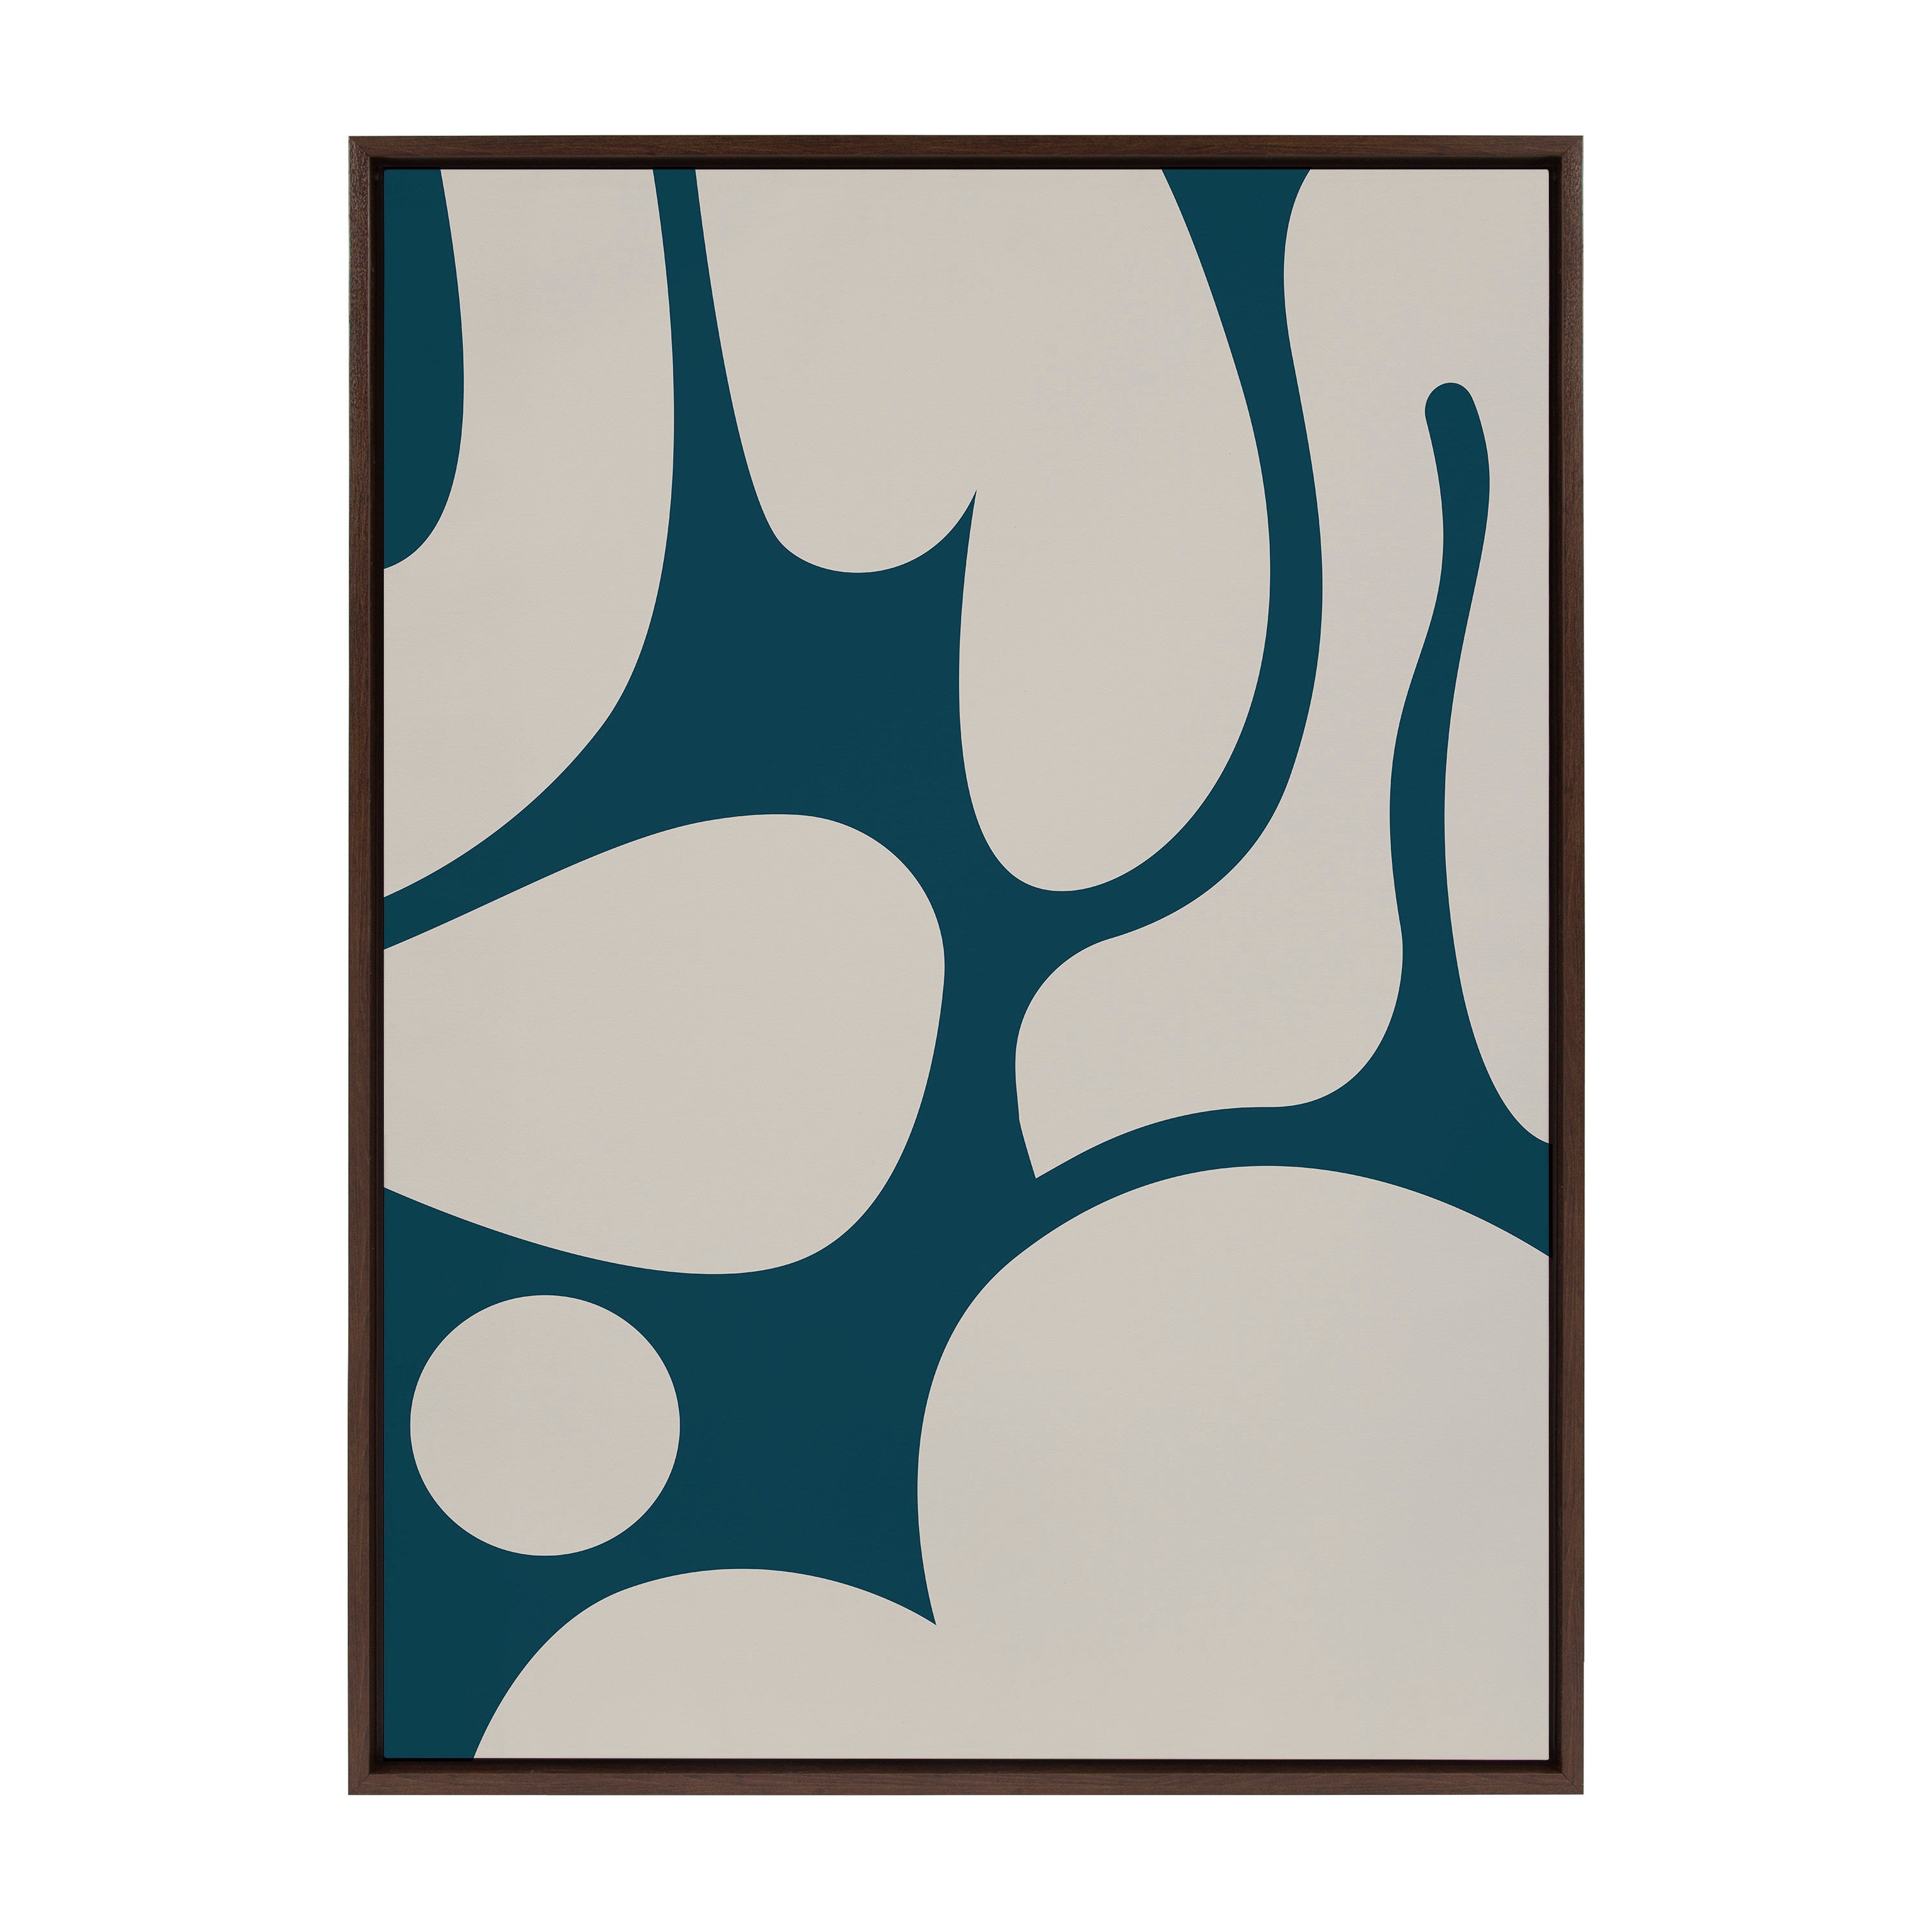 Sylvie Groovy Happy Abstract Dark Green Teal and Tan Framed Canvas by The Creative Bunch Studio